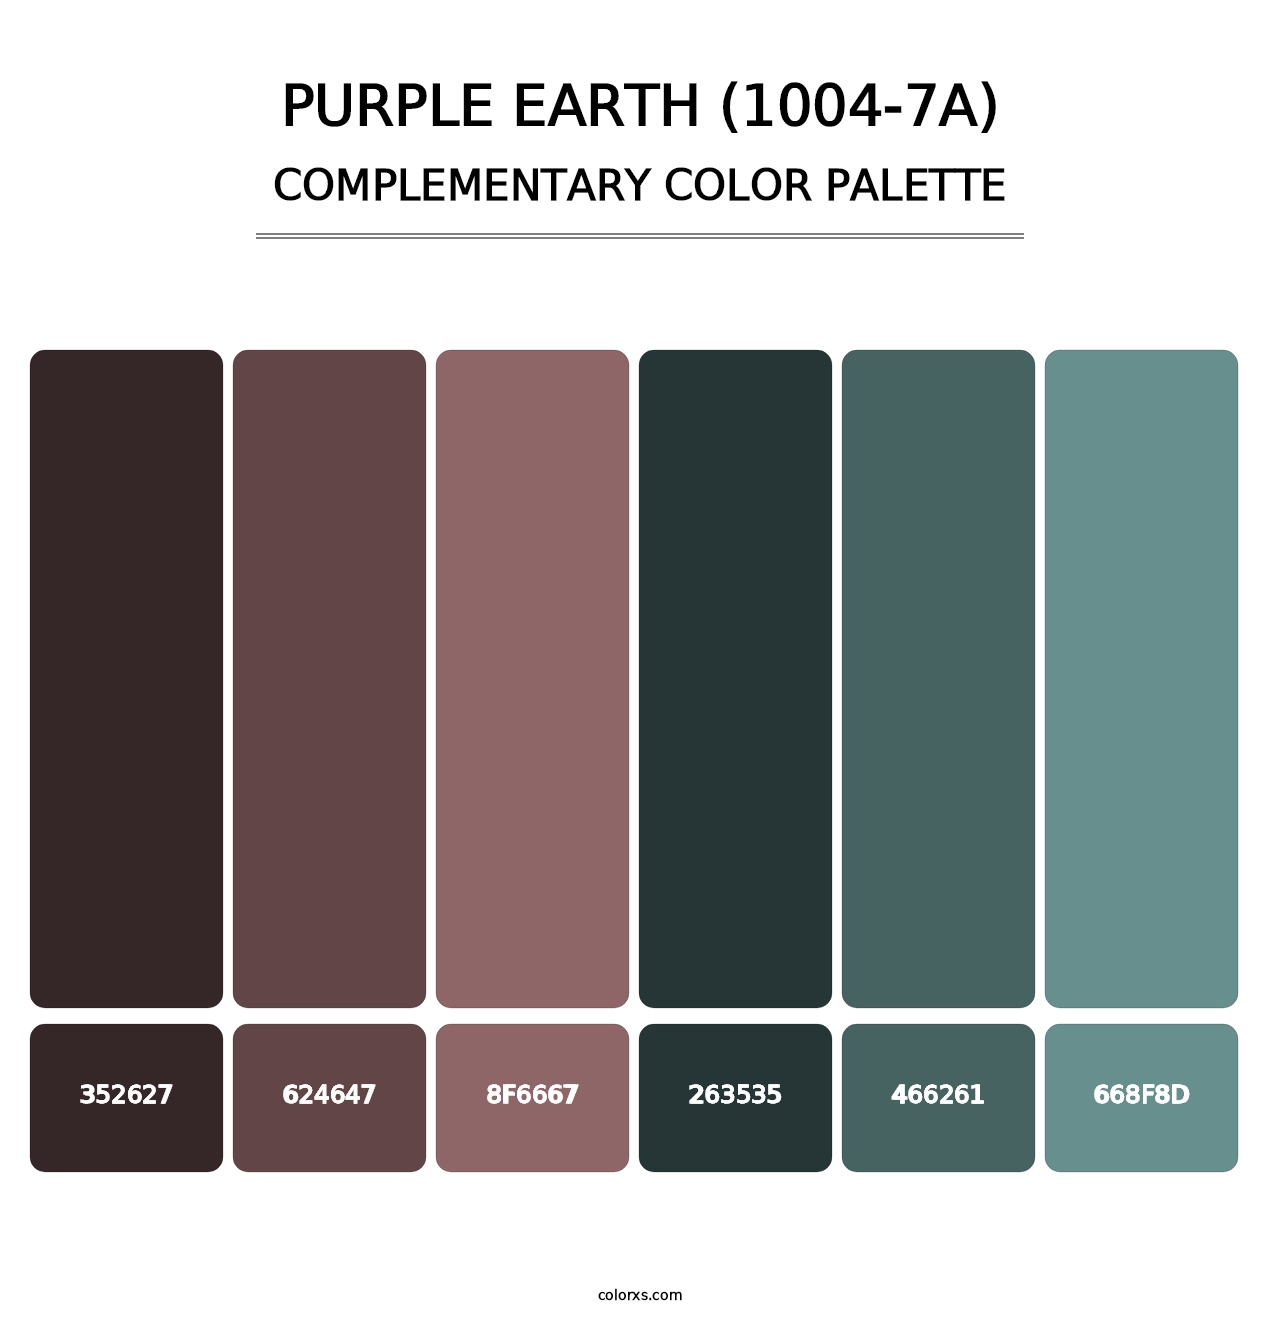 Purple Earth (1004-7A) - Complementary Color Palette